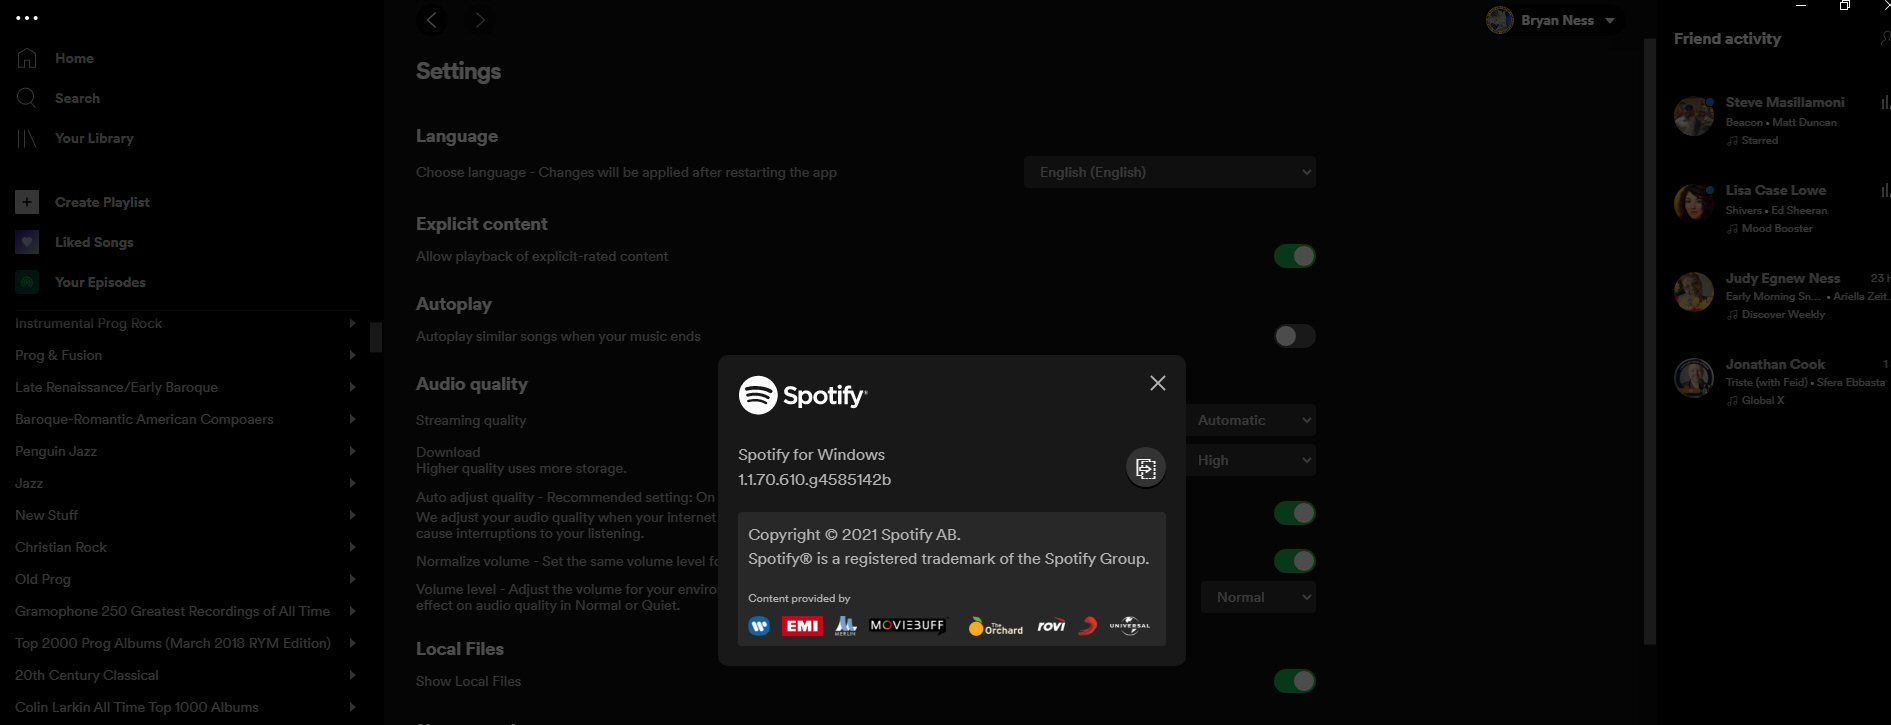 Connect - Autoplay DISABLED, but still ACTIVE - Page 3 - The Spotify  Community